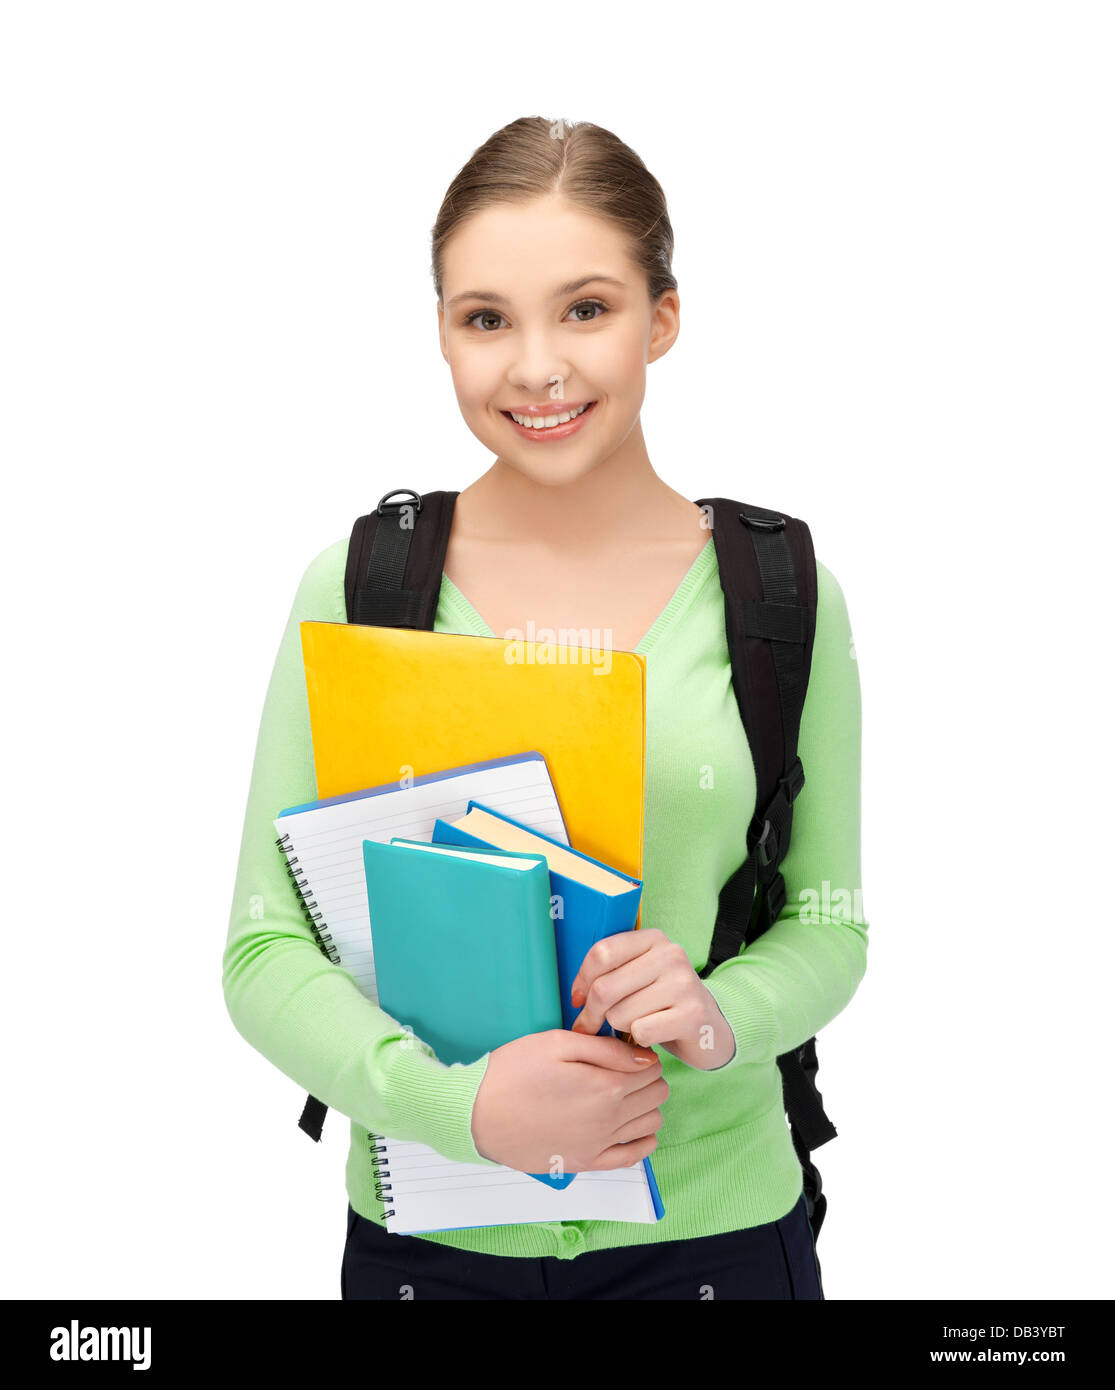 student with books and schoolbag Stock Photo